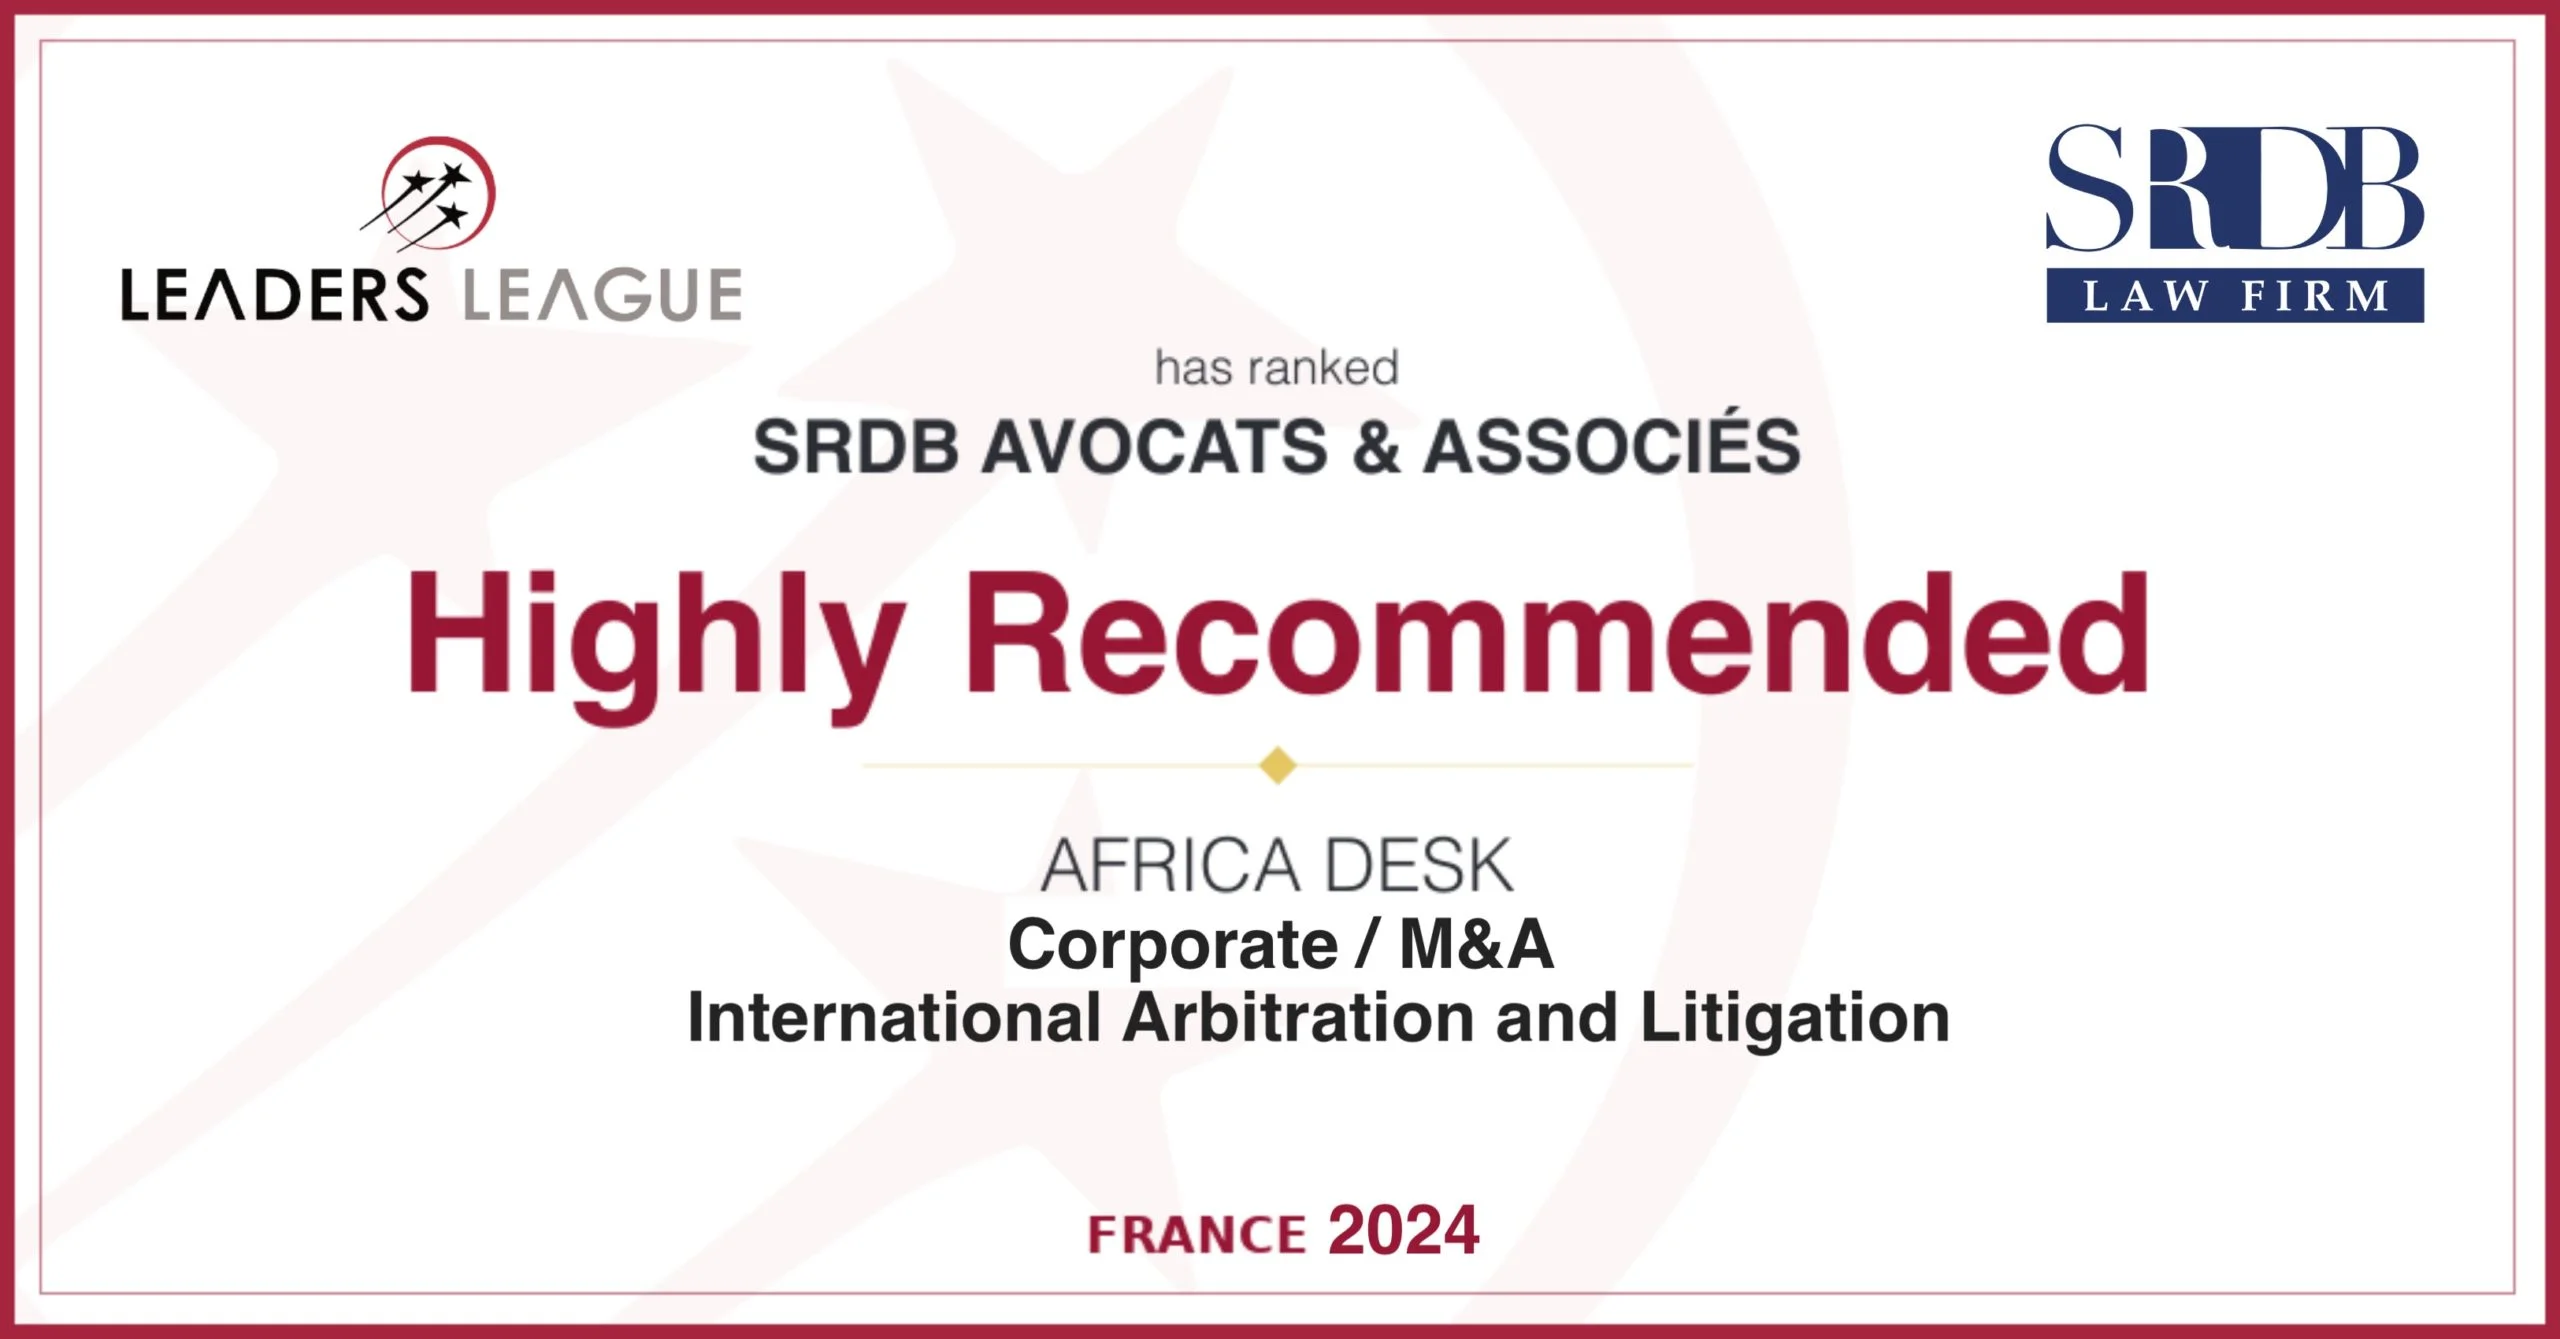 BEST LAW FIRMS ON THE AFRICAN CONTINENT IN 2024  LEADERS LEAGUE RANKINGS